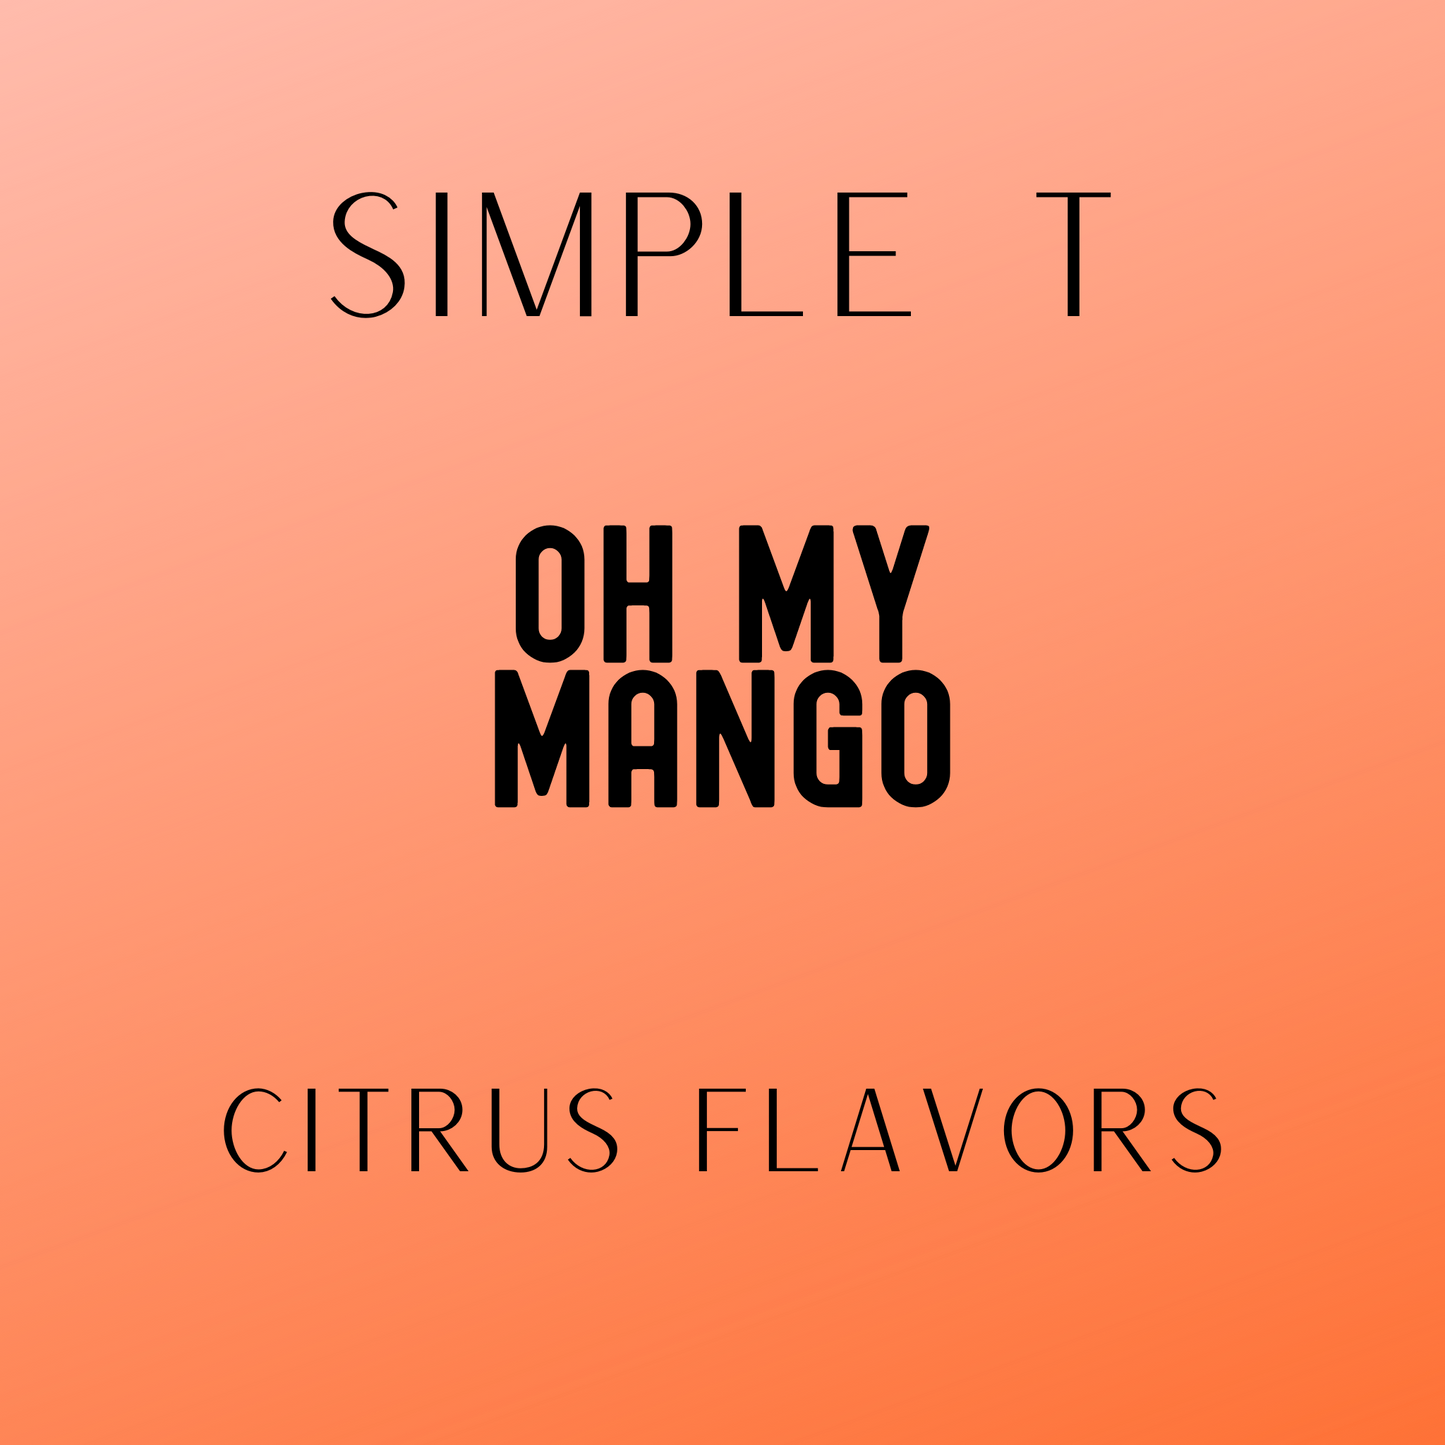 Oh My Mango Simply T Packets (Citrus Flavors)